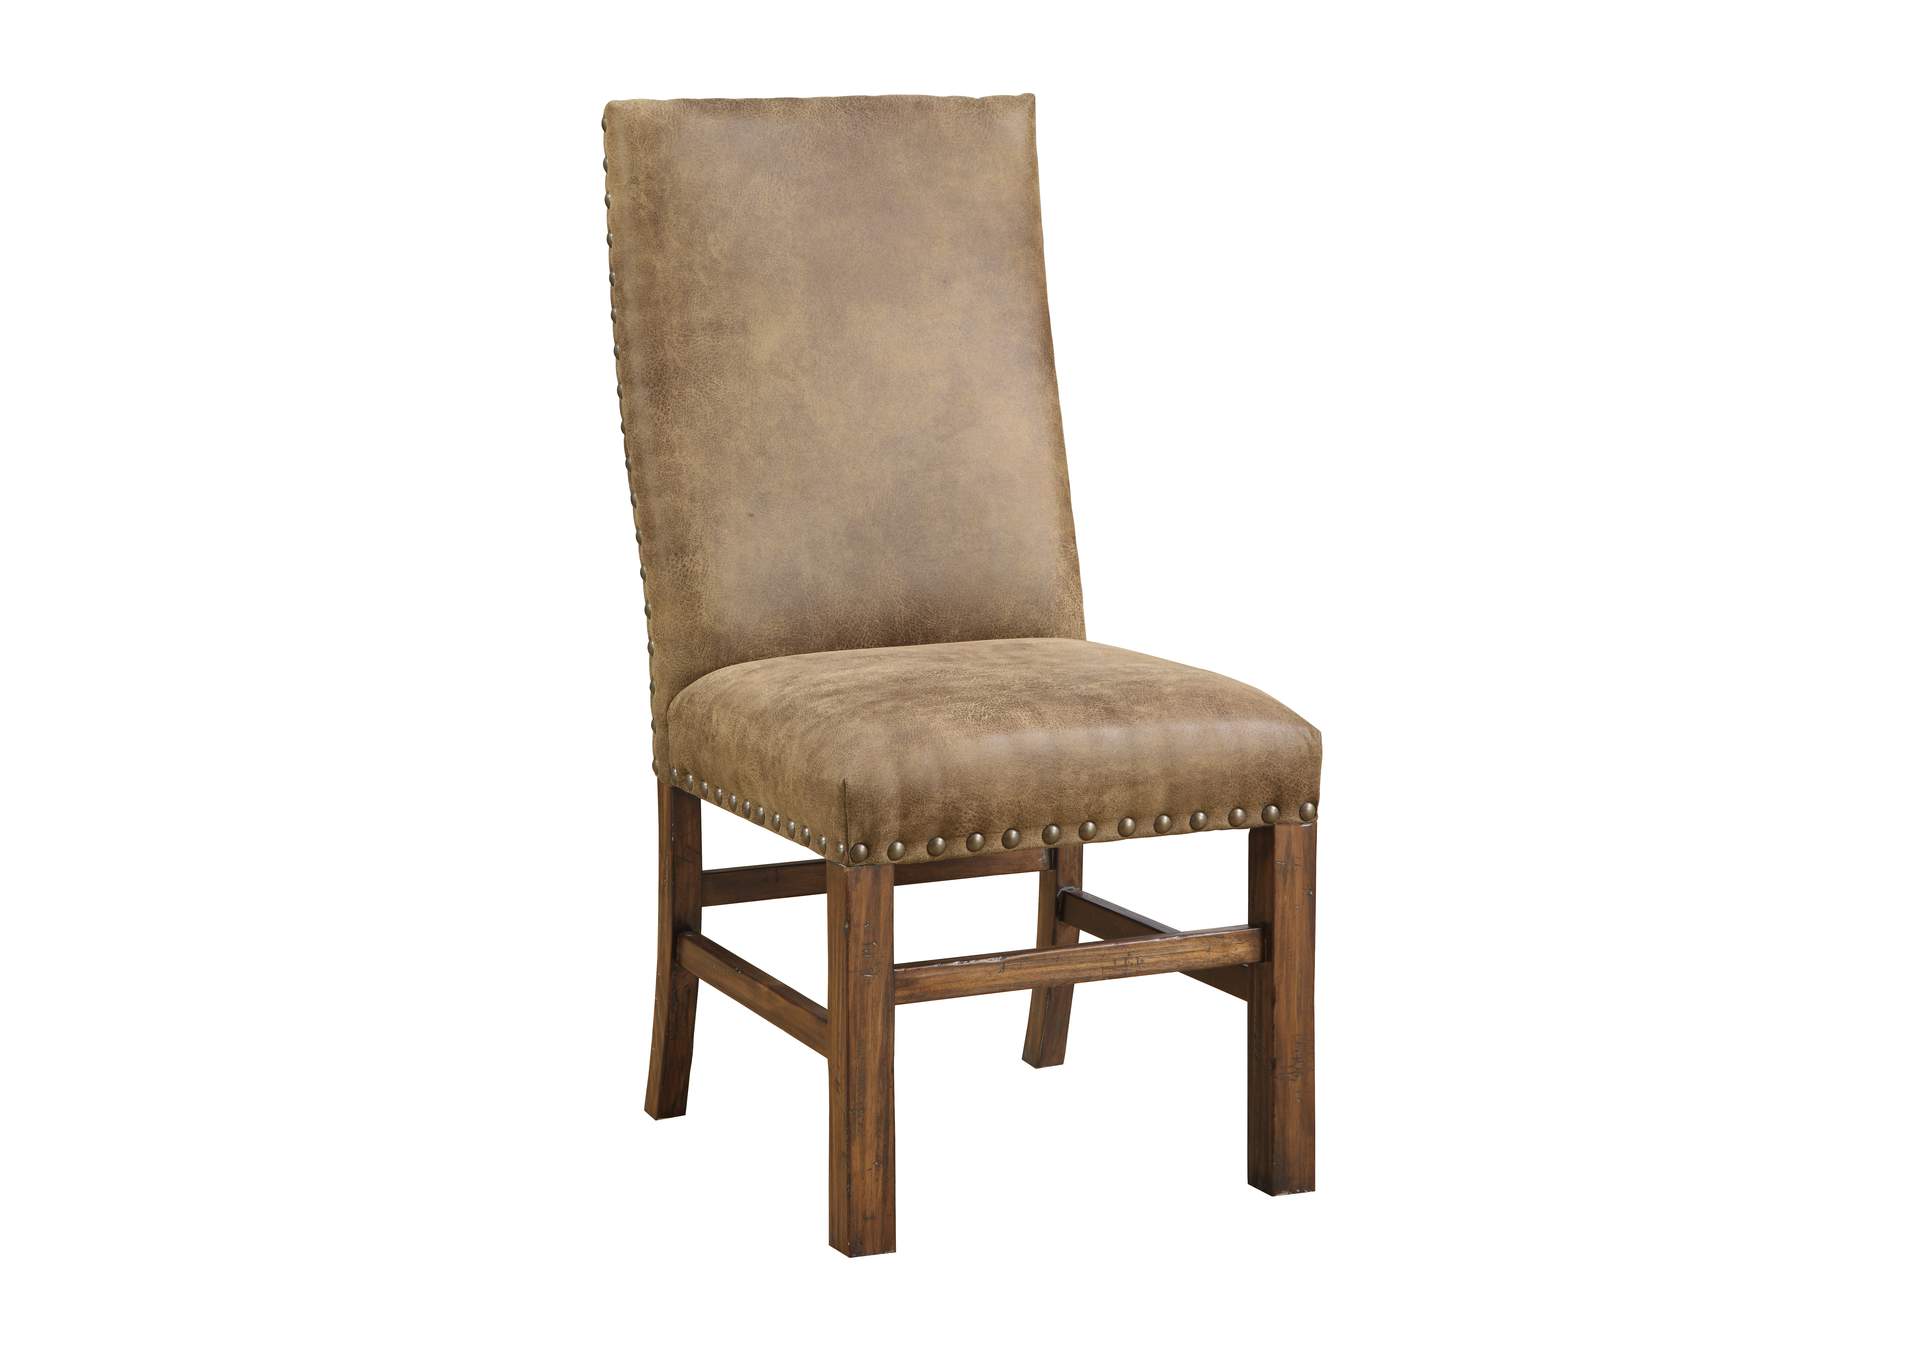 Chambers Creek Upholstered Dining Chair,Emerald Home Furnishings